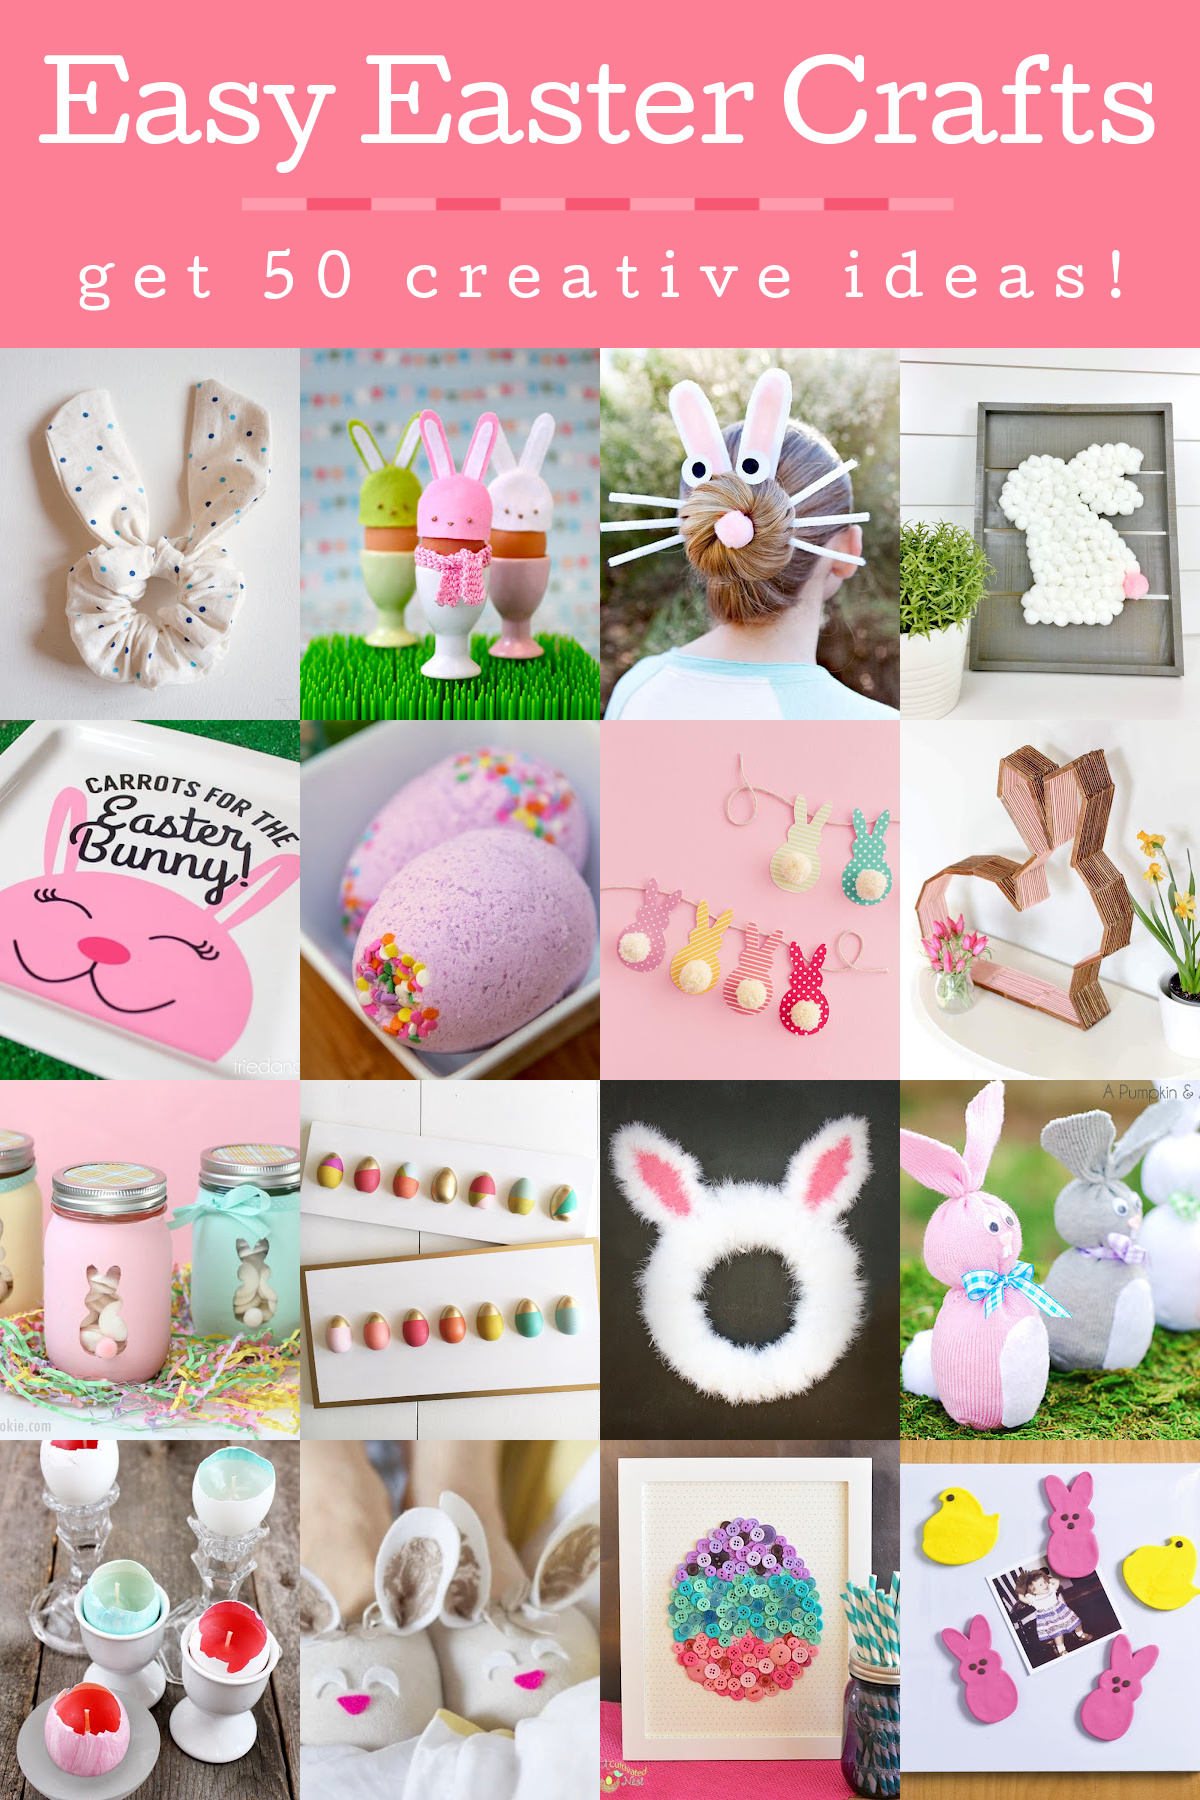 Easy Easter Crafts you'll love